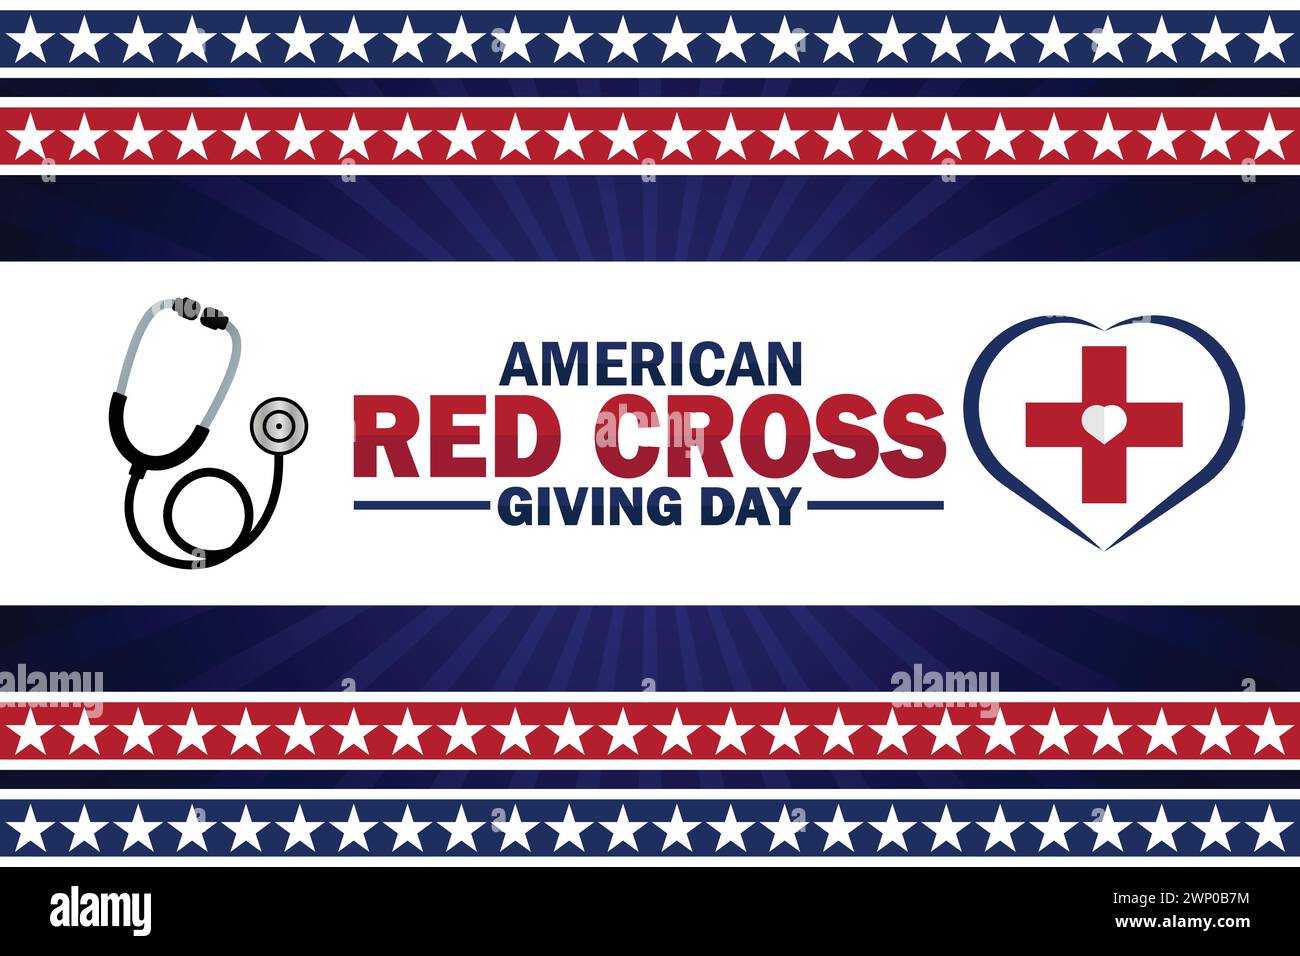 American Red Cross Giving Day wallpaper with typography. American Red Cross Giving Day, background Stock Vector